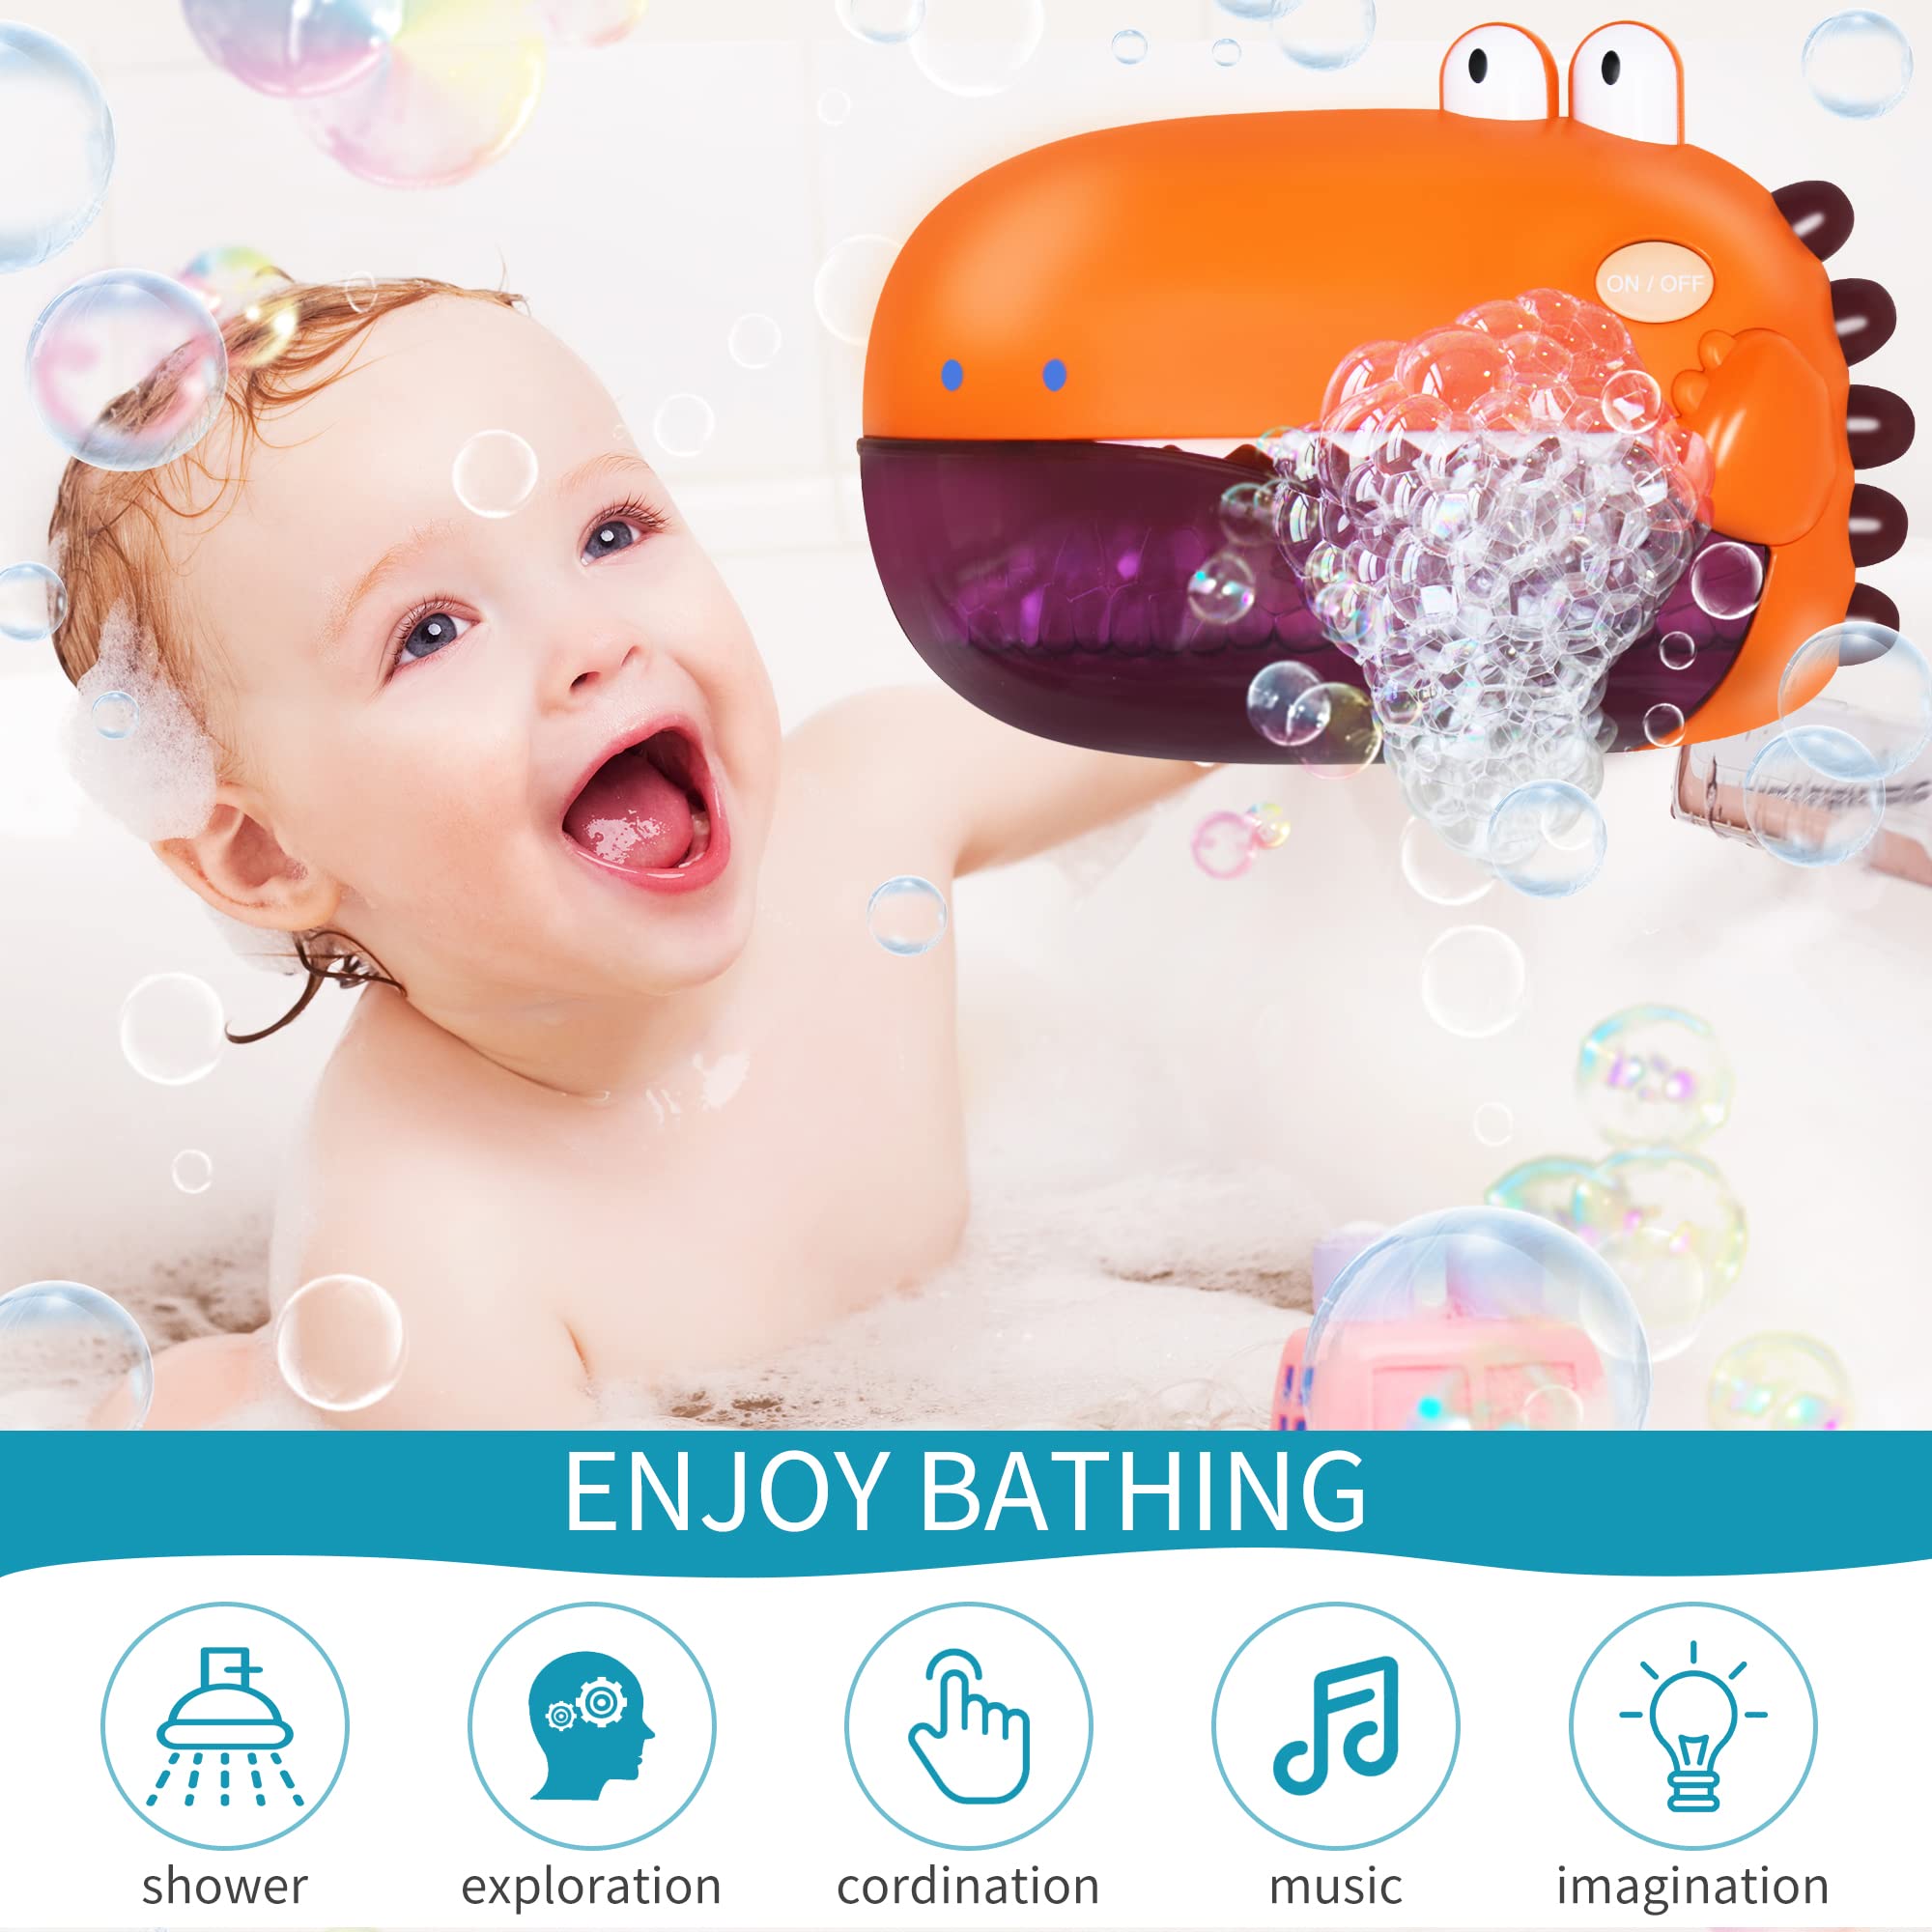 Grechi Dinosaur Bath Toys,Baby Bath Toys for The Baby Bathtub,Toddler Bath Toys Automatic Bubble Machine,Plays 12 Children’s Songs,Bath Toy Makes Great Gifts for Toddlers Age 18m+ Girl Boy